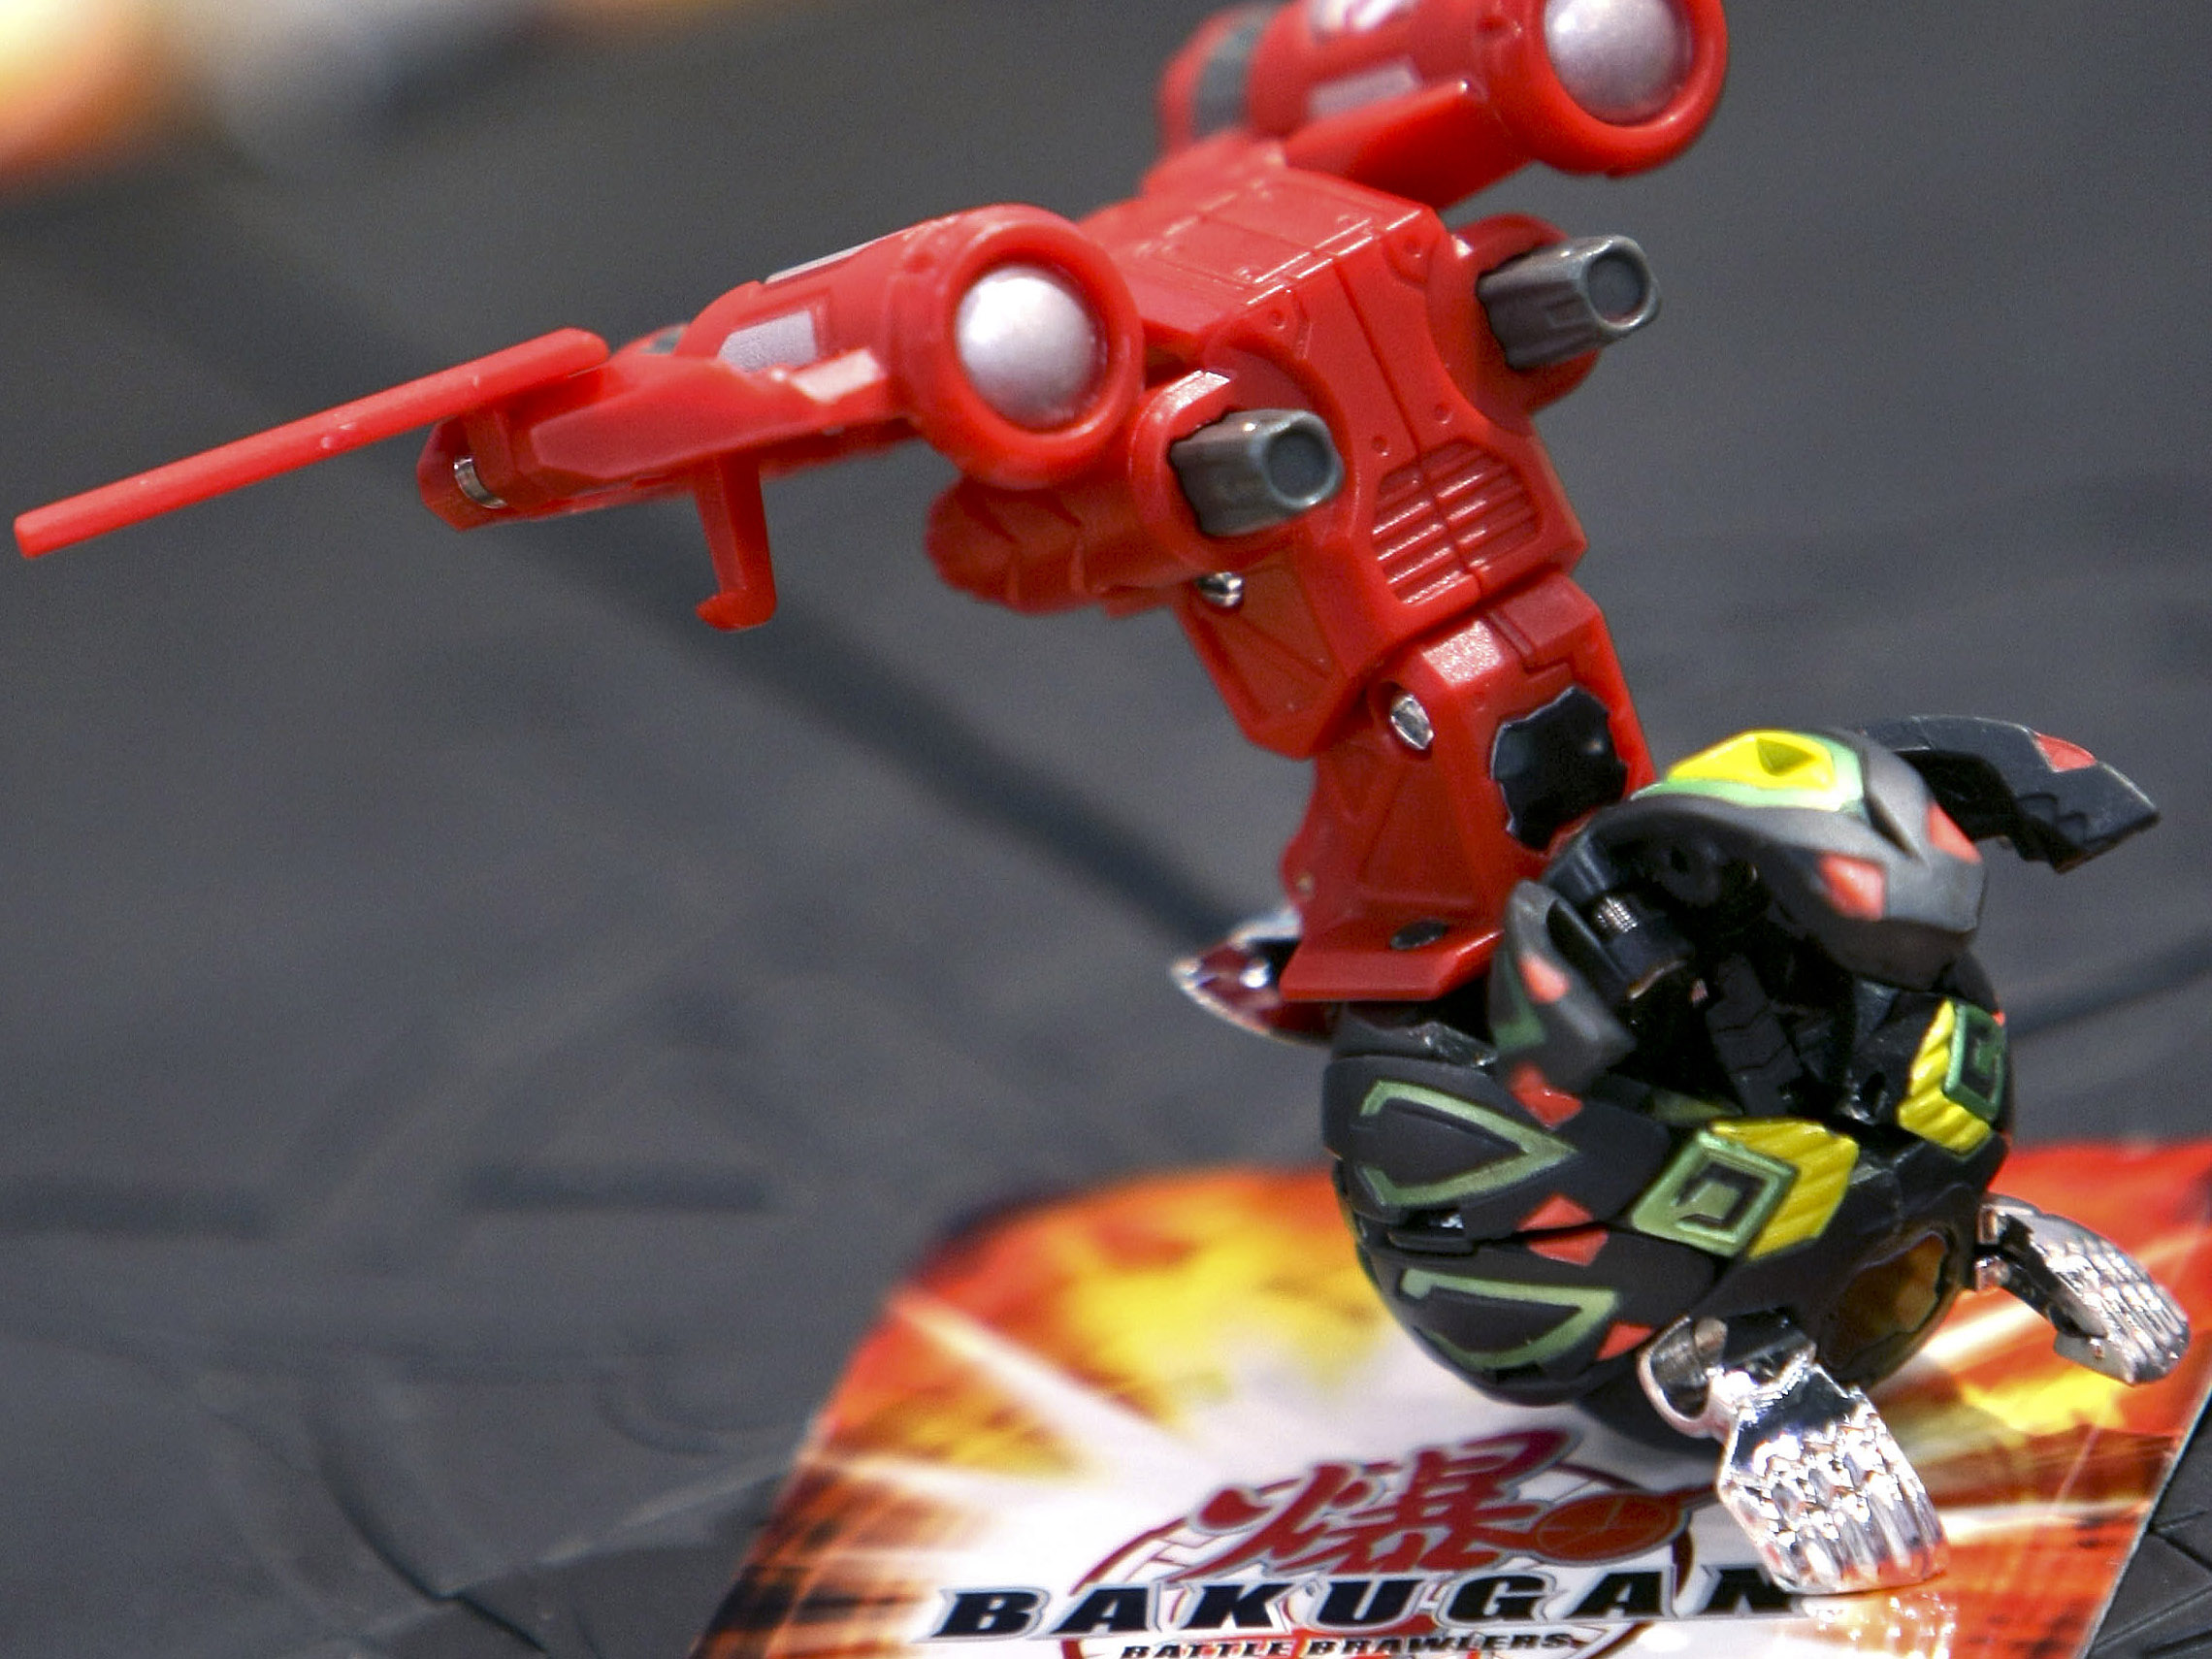 Spin Master settles lawsuit against Chinese company over Bakugan toys